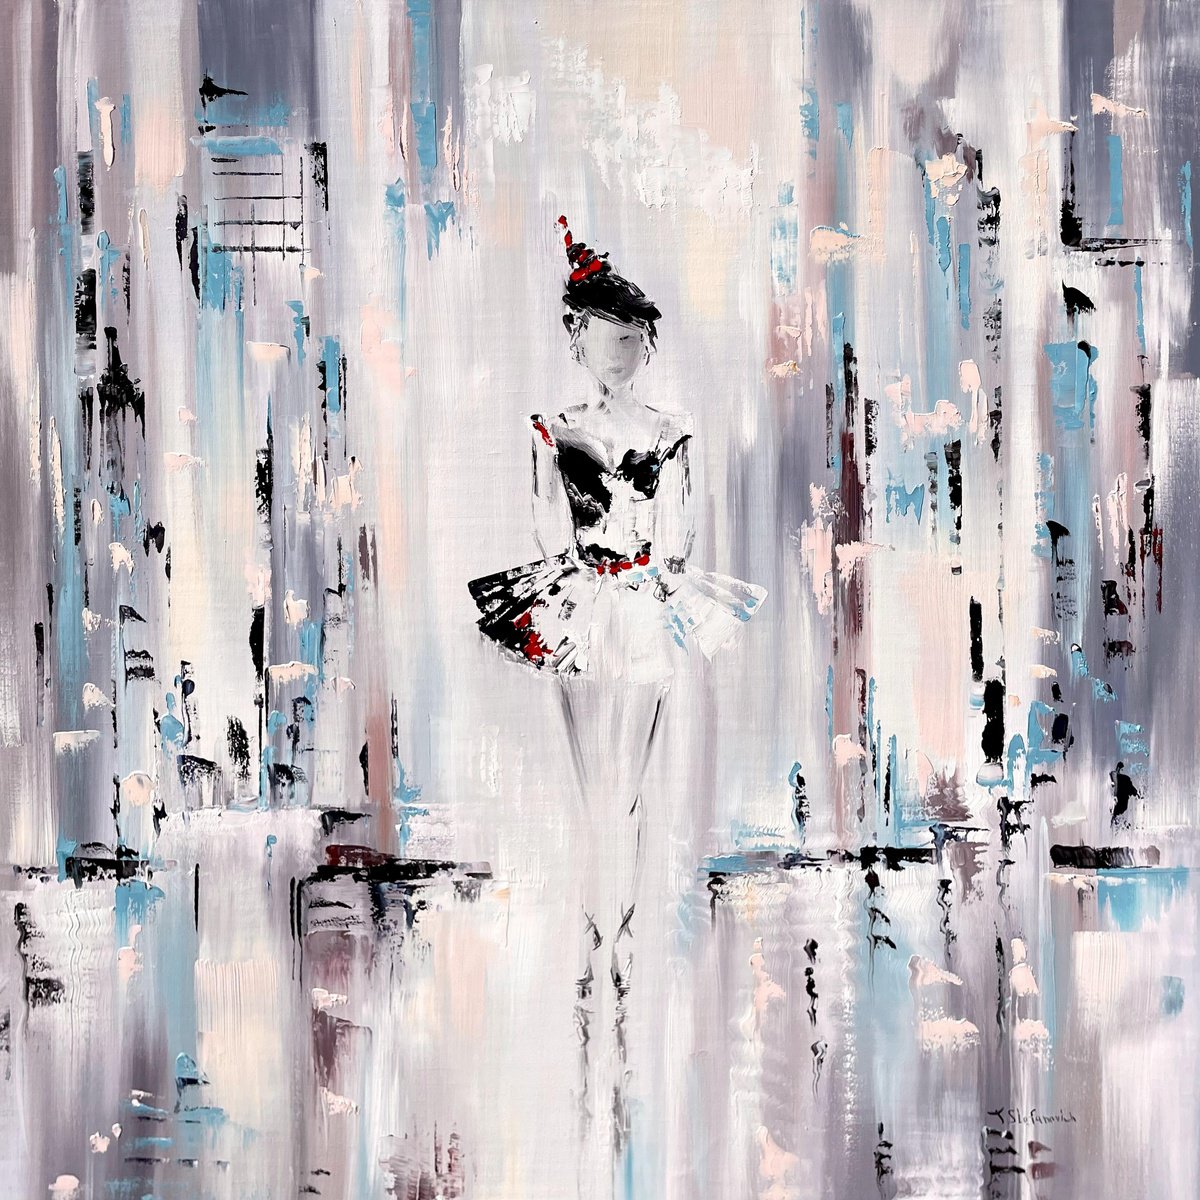 Lady abstract, 70 x 70 cm by Tanya Stefanovich